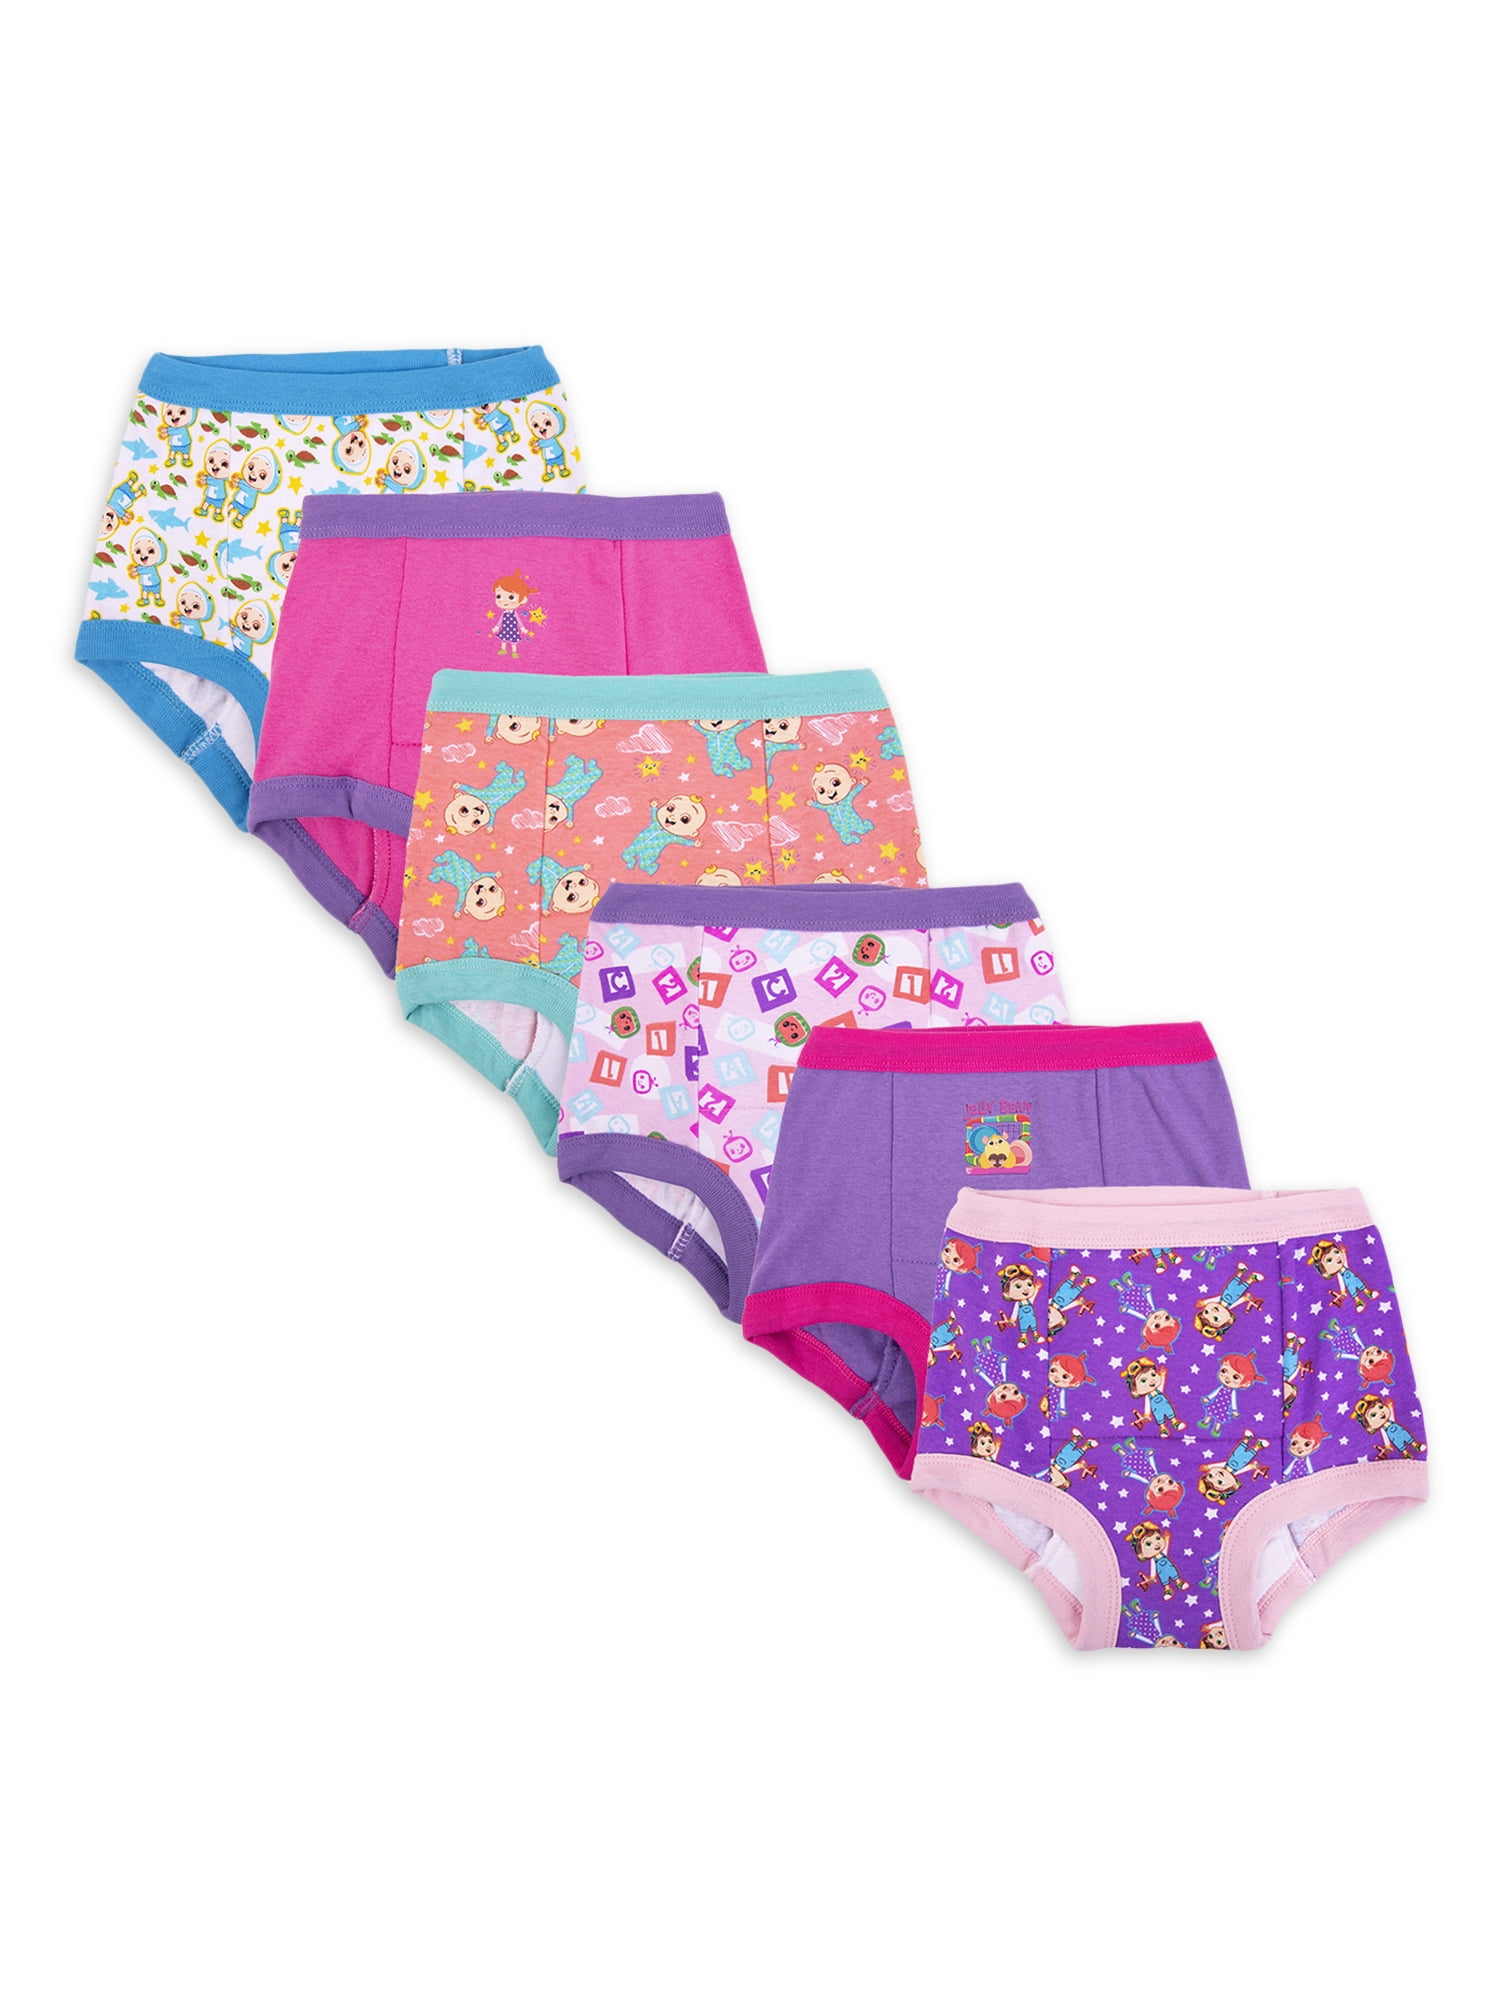 Peppa Pig Baby Girls Toddler Potty Training Pants Multipack